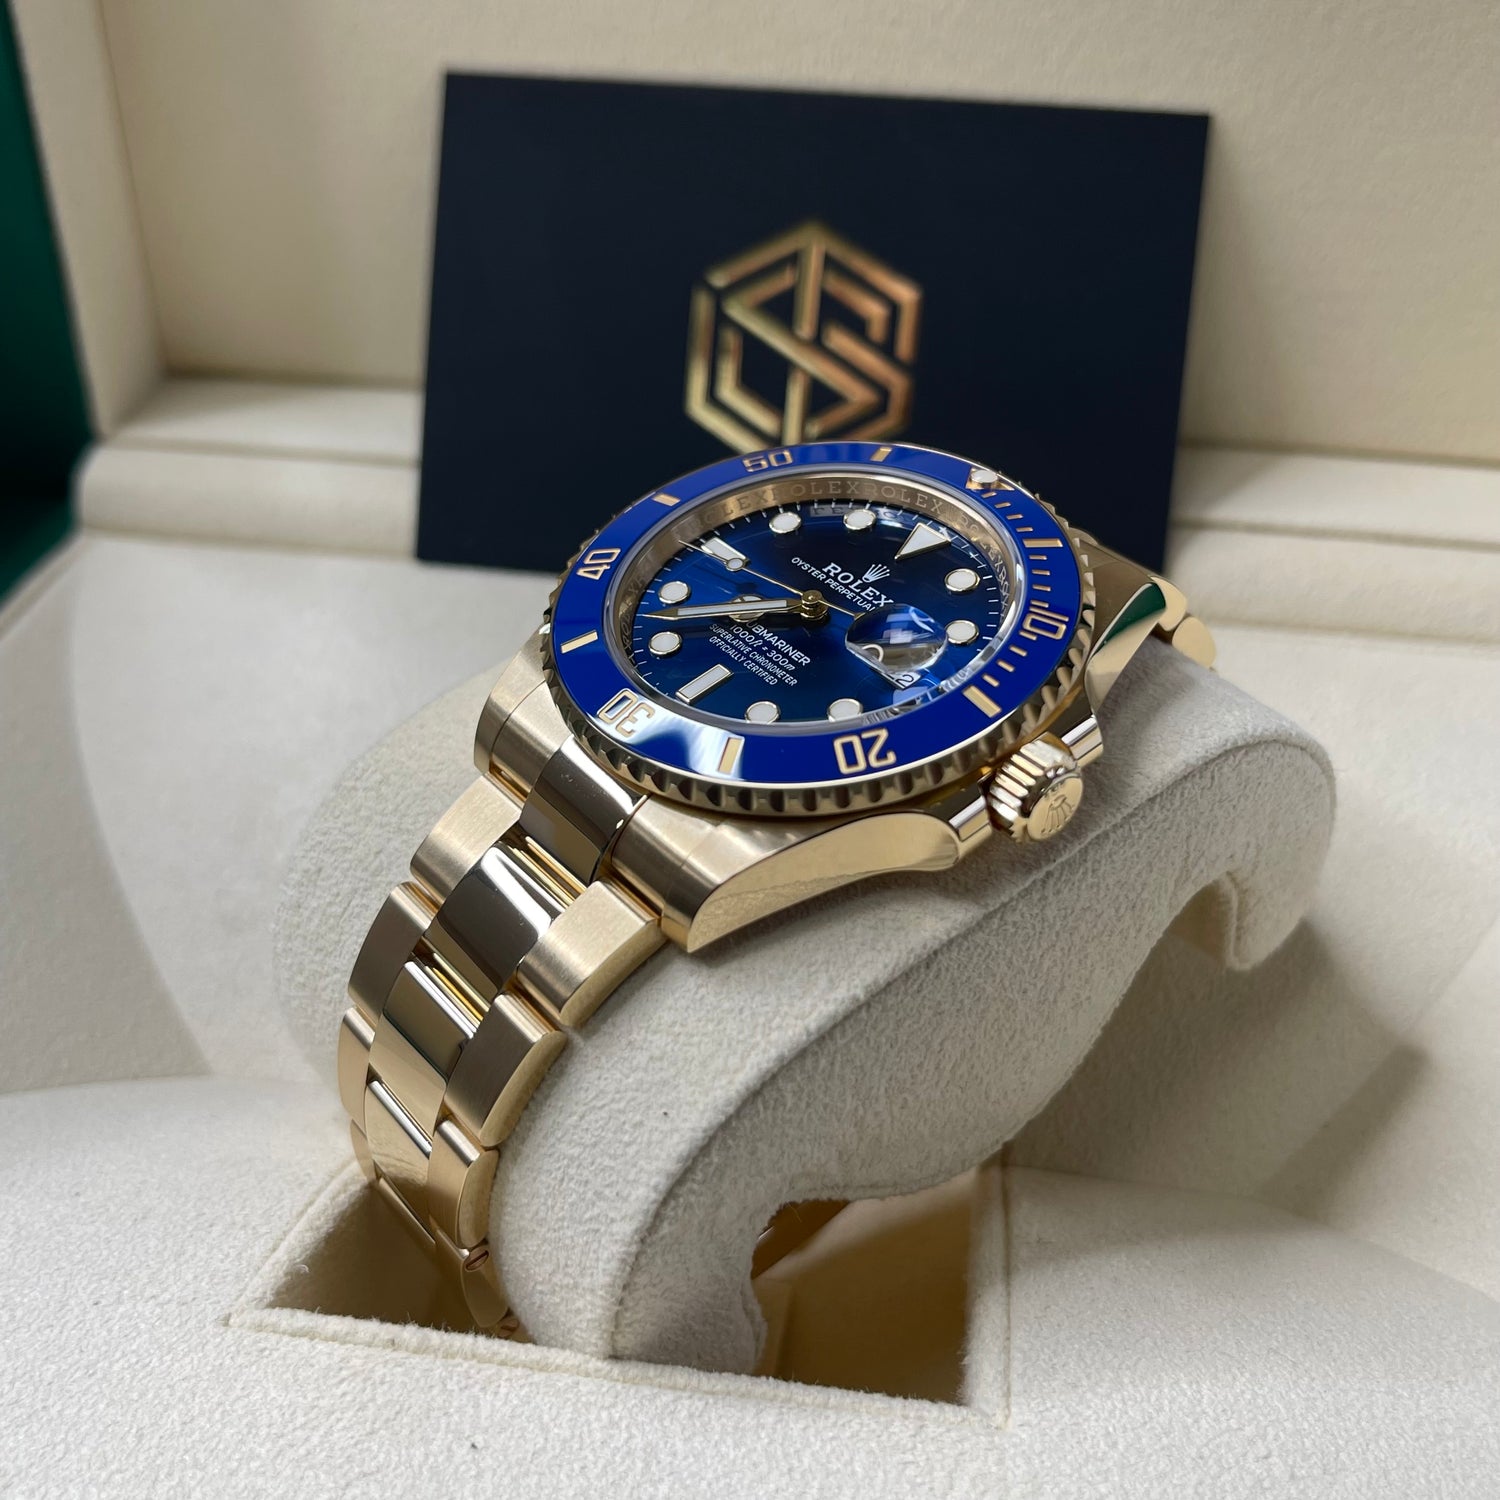 Rolex Oyster Perpetual Submariner Yellow Gold 126618LB